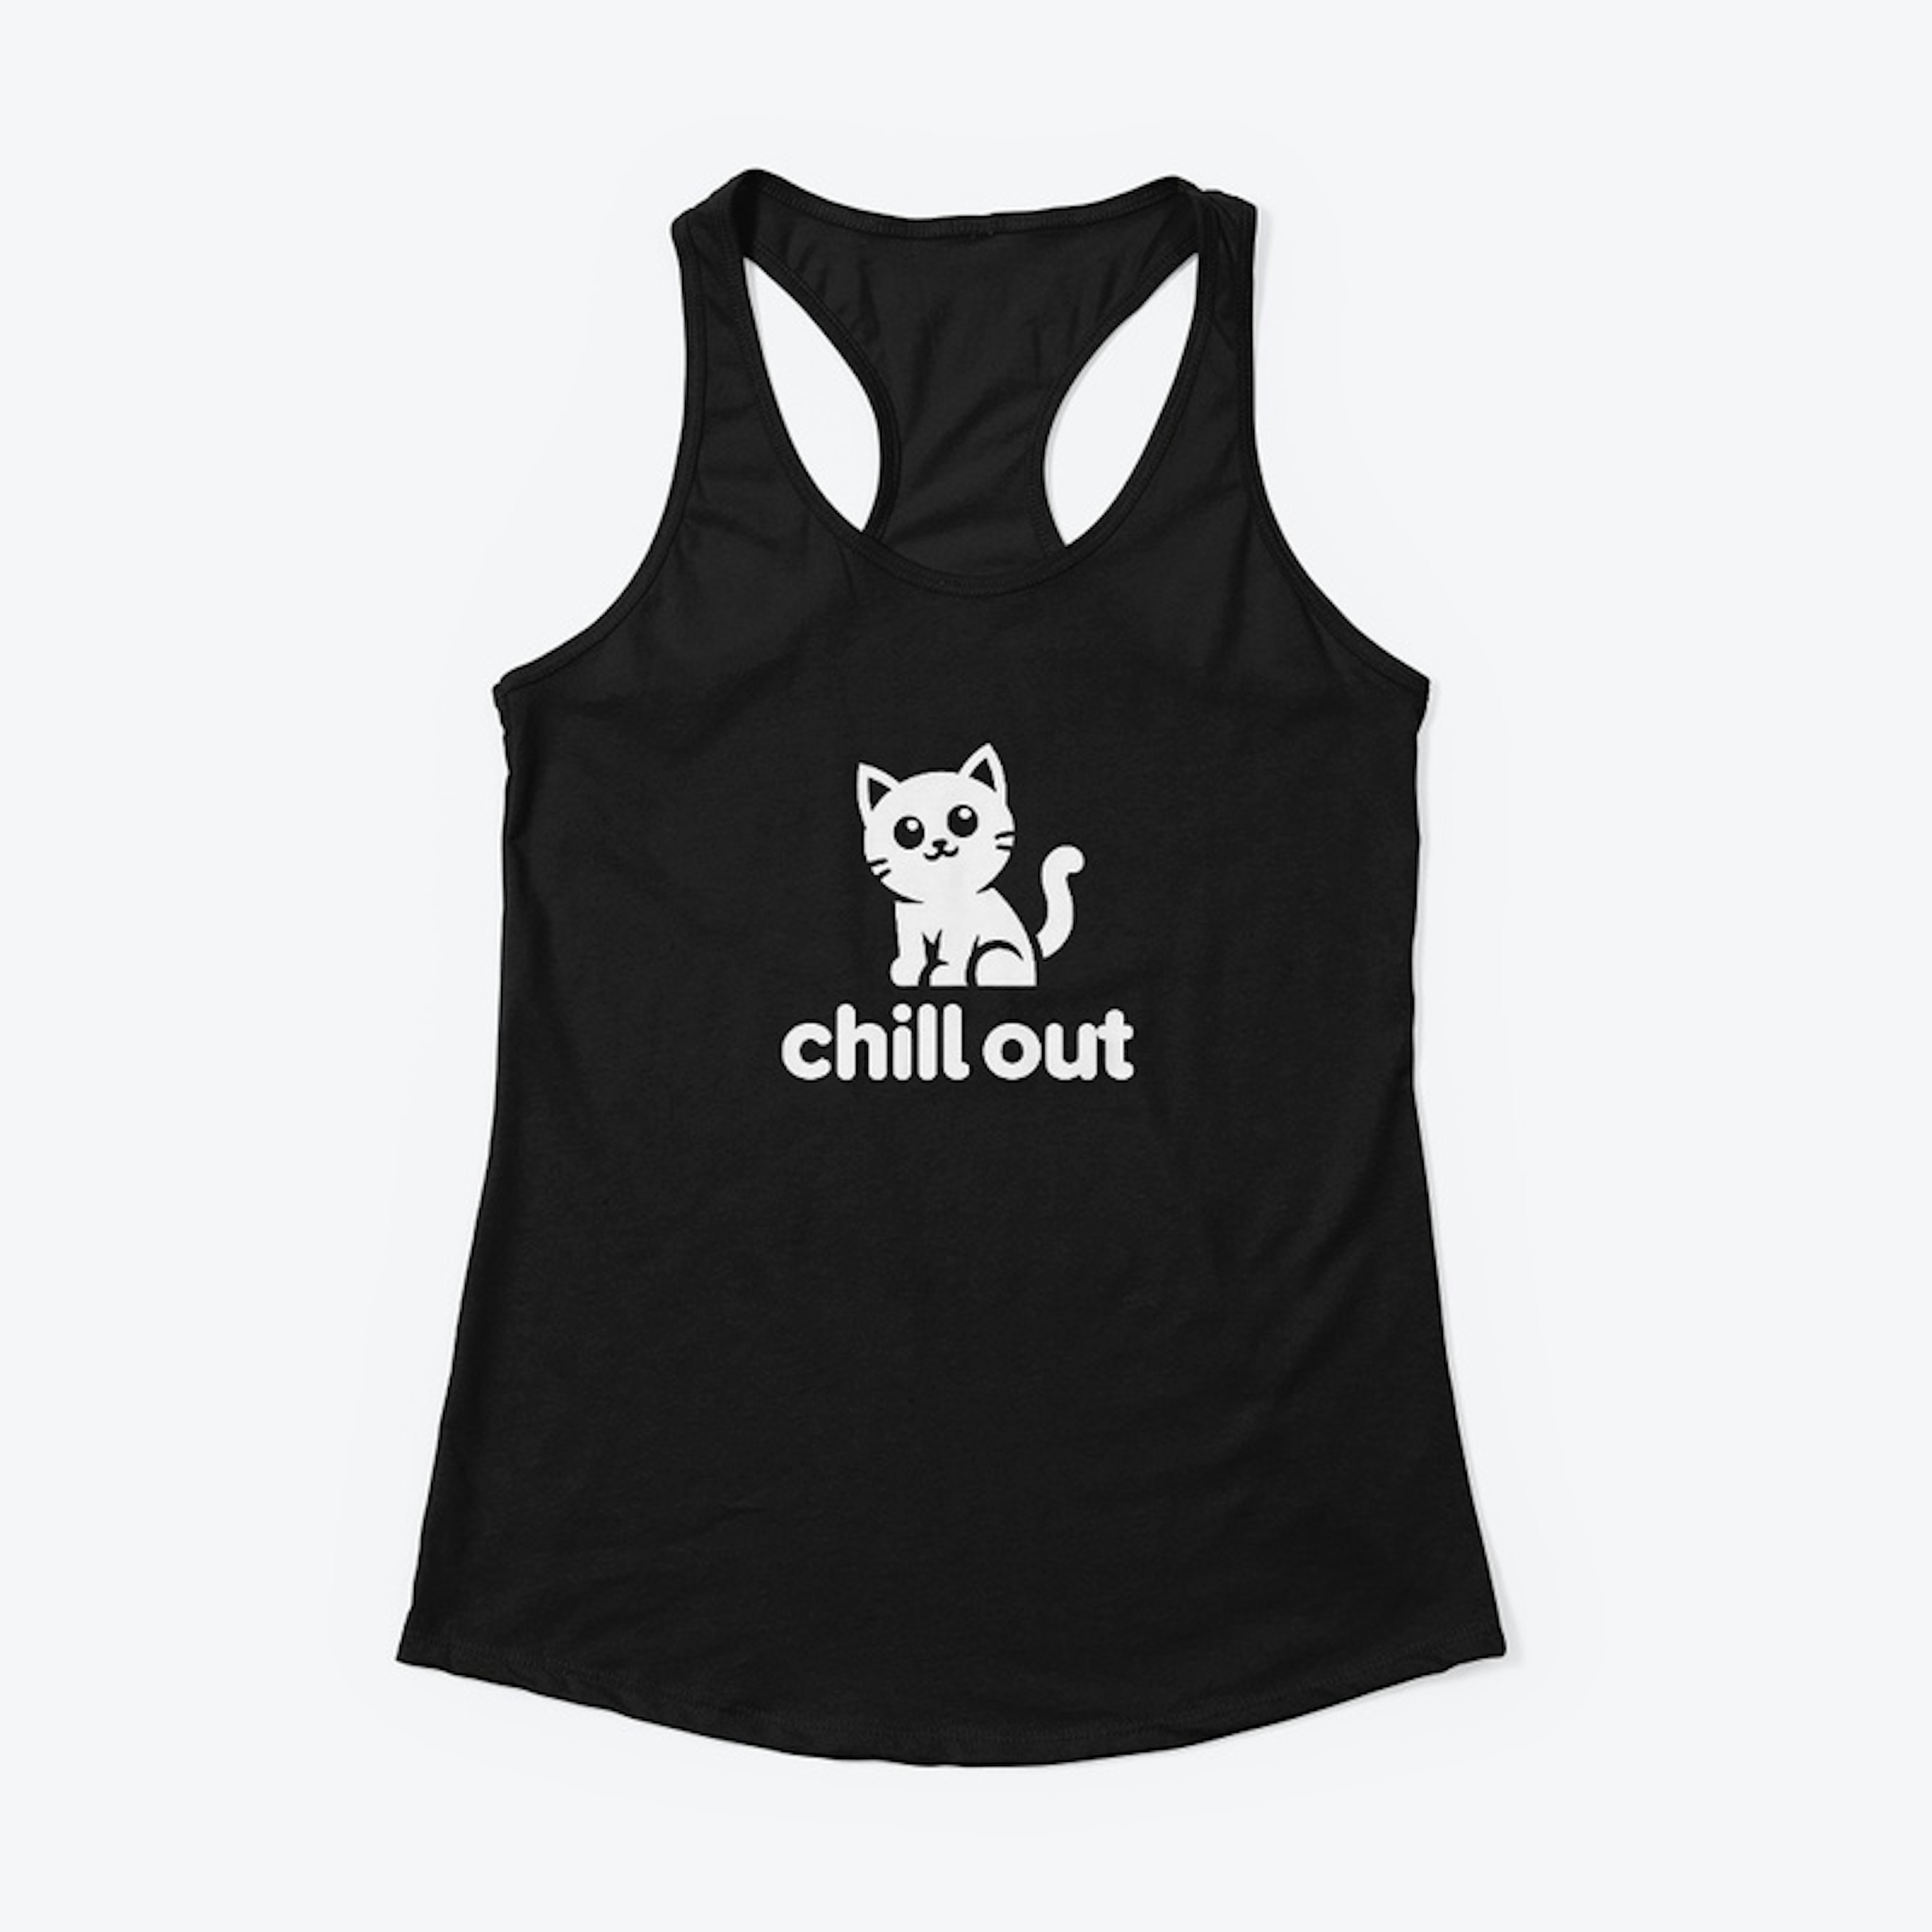 Chillout Cute Cat